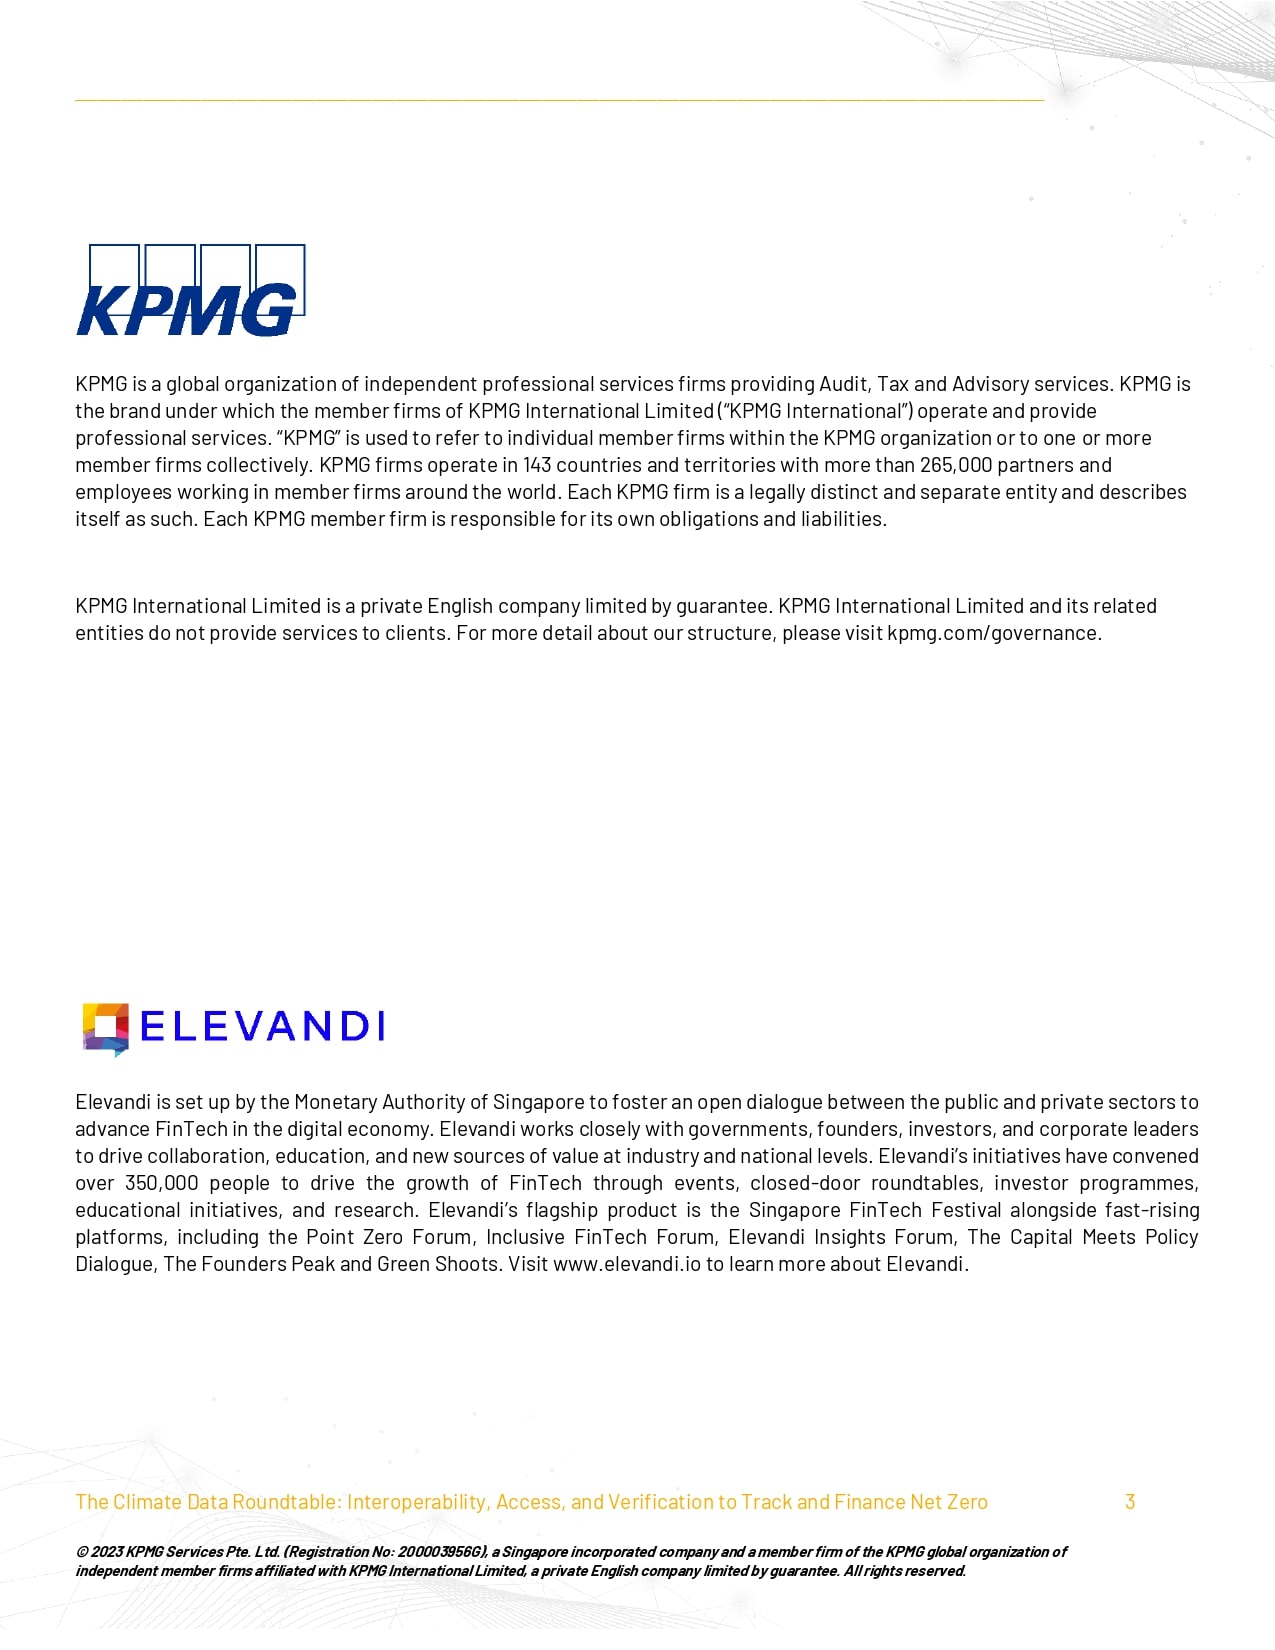 The-Climate-Data-Roundtable-KPMG-3